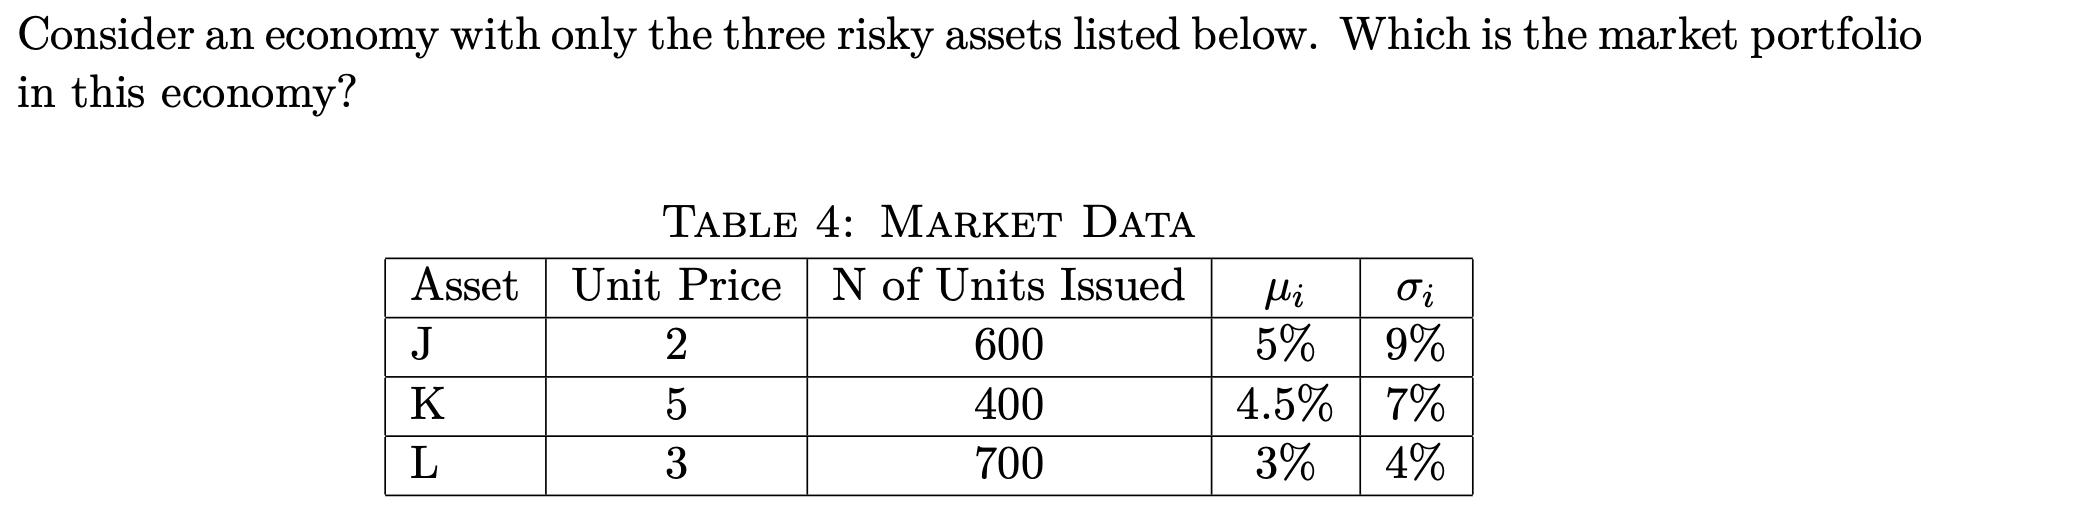 Consider an economy with only the three risky assets listed below. Which is the market portfolio in this